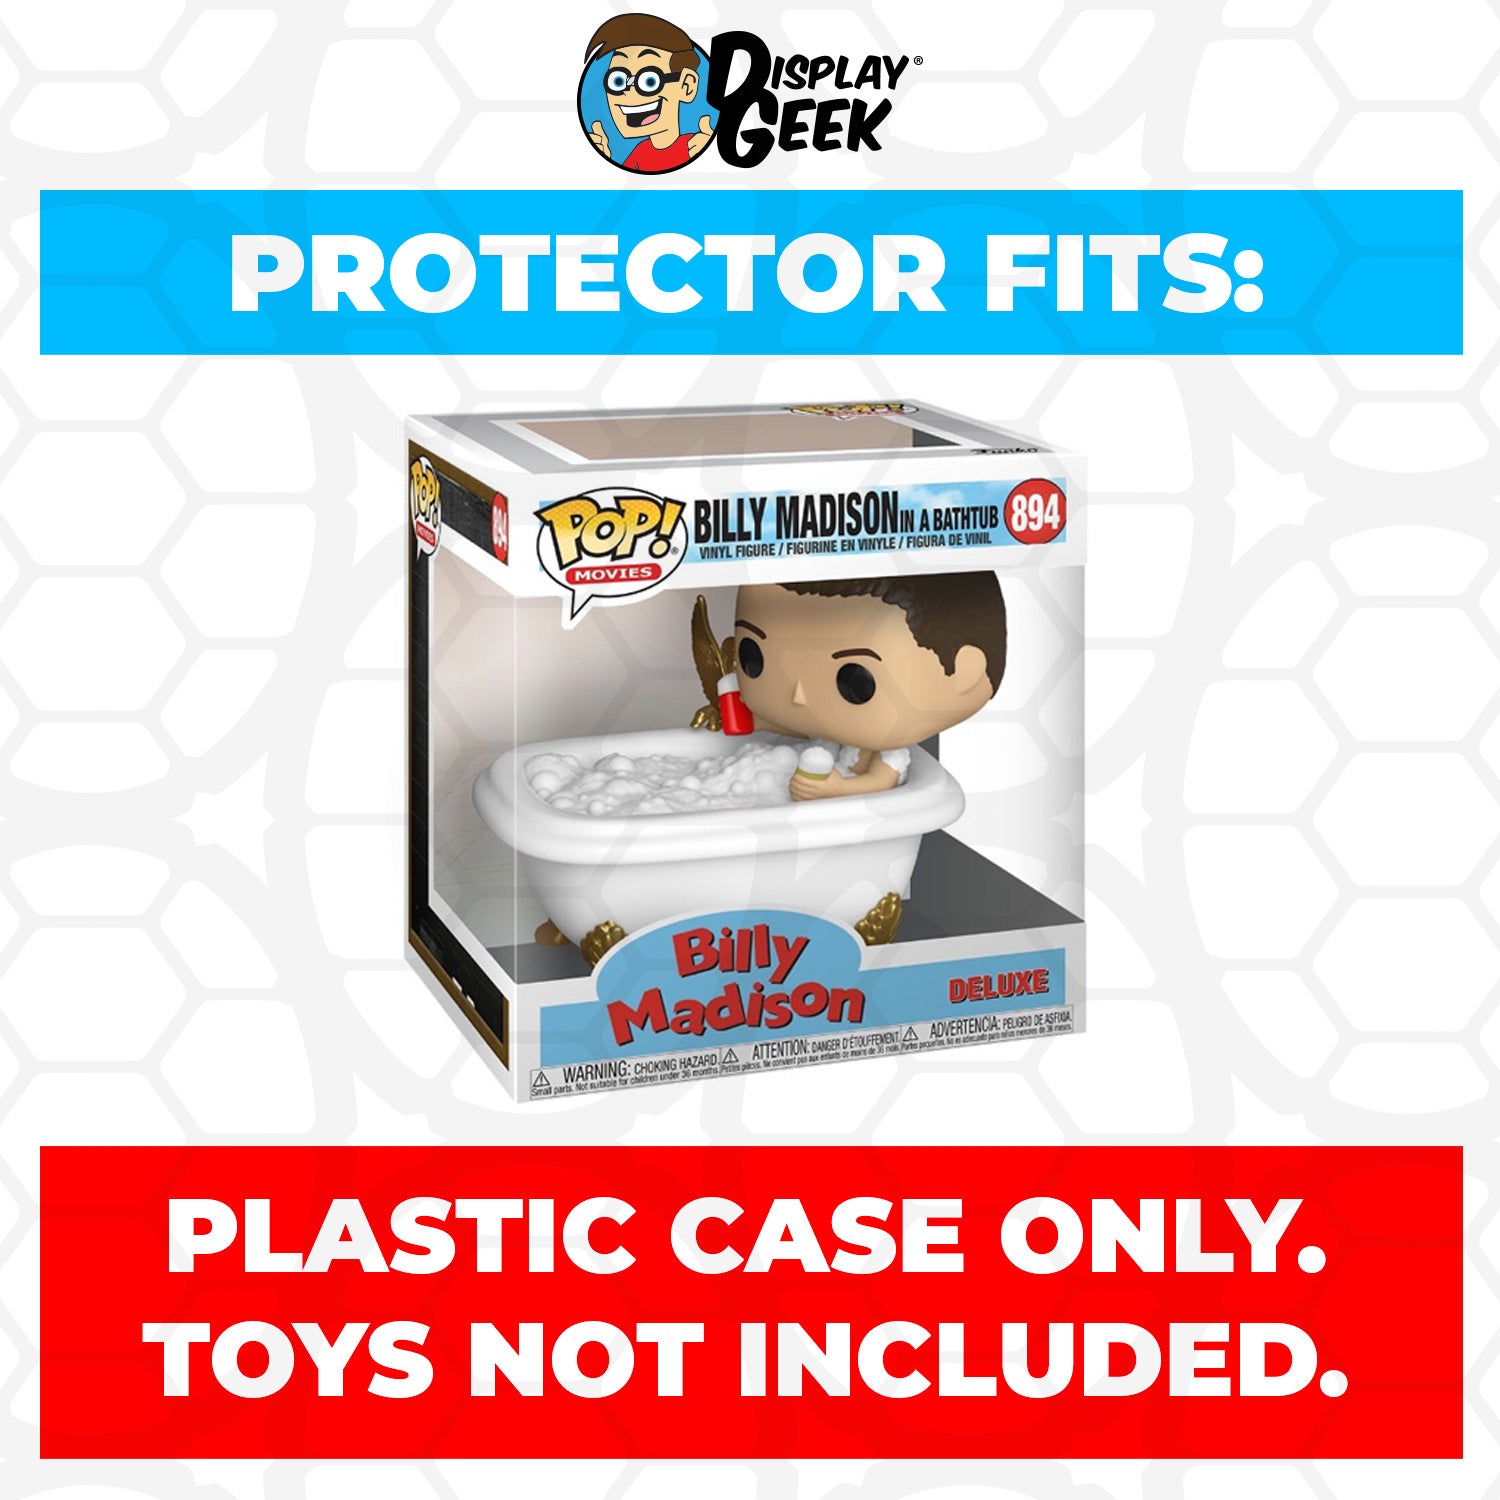 Pop Protector for Billy Madison in a Bathtub #894 Funko Pop Deluxe - PPG Pop Protector Guide Search Created by Display Geek